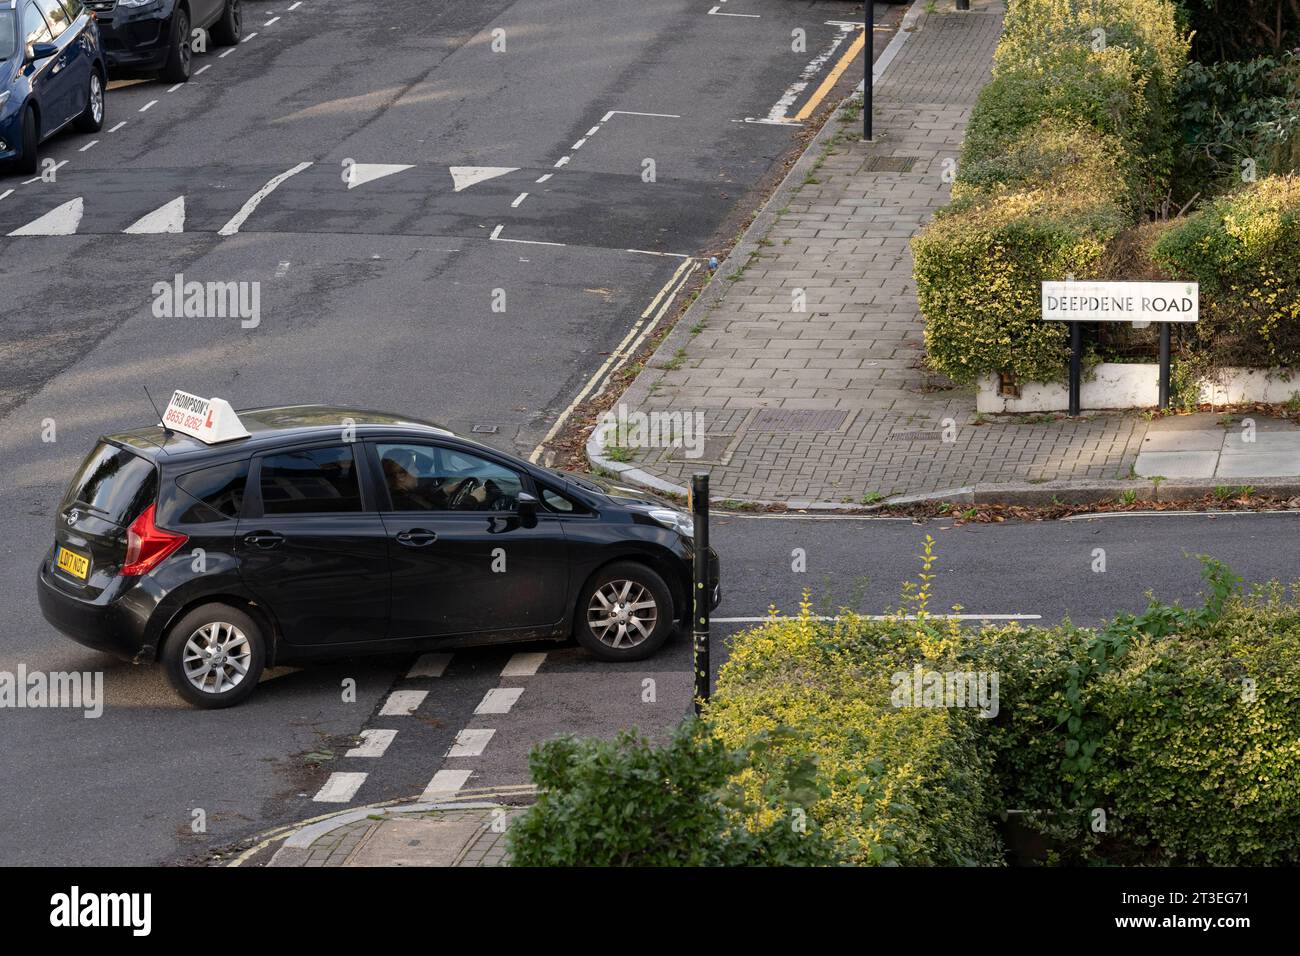 A learner driver taking lessons from an instructor cuts the corner off as they turn right on a residential street in Lambeth, south London, on 20th October 2023, in London, England. Stock Photo